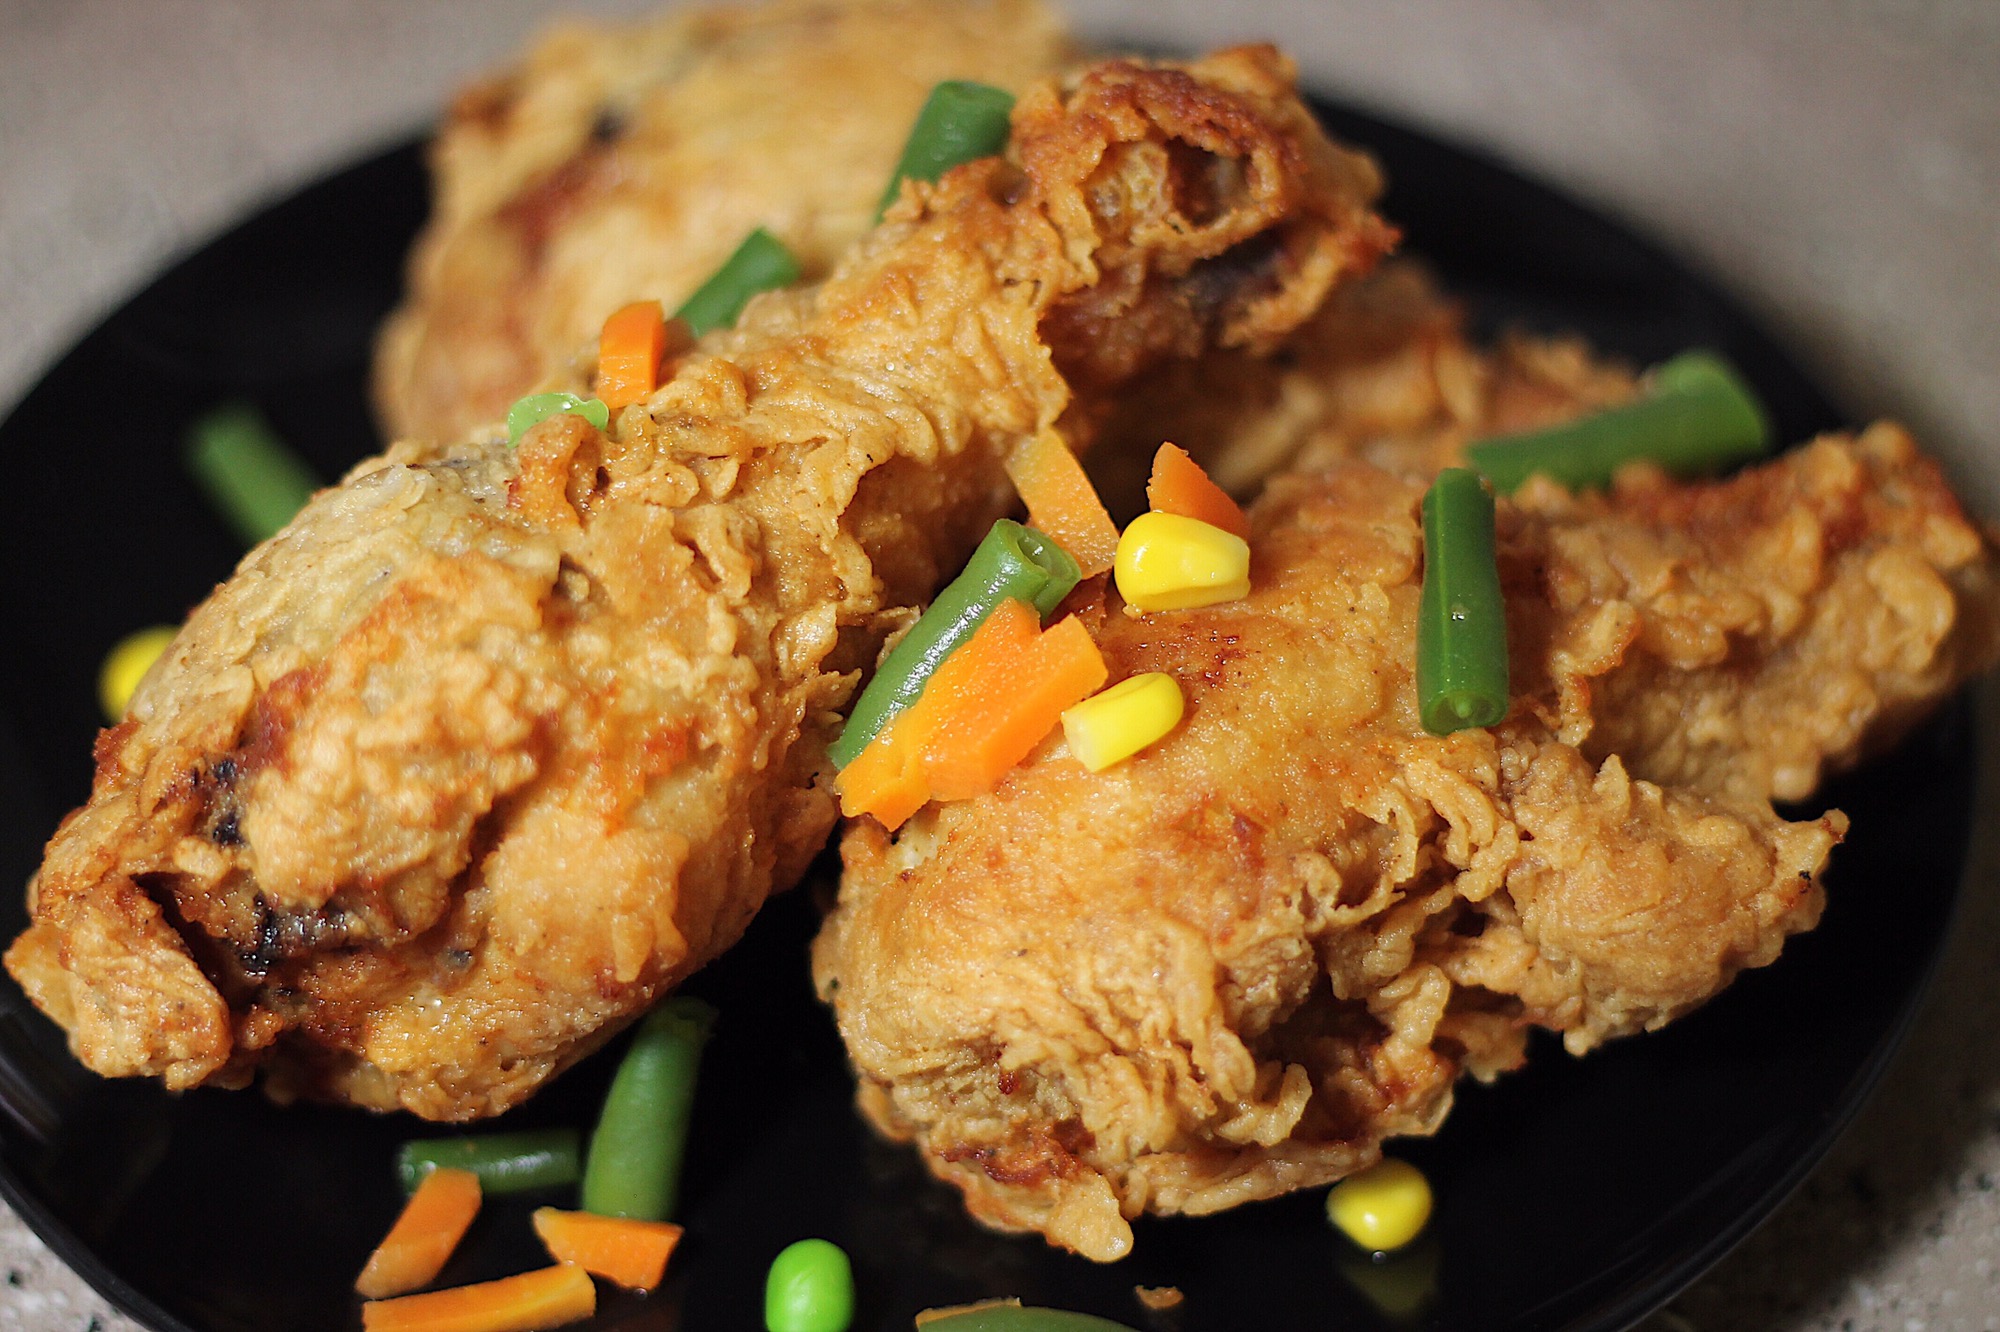 batter fried chicken legs recipe, best fried chicken recipe in the world, fried chicken thighs recipe, how do you fried chicken, ingredients of crispy fried chicken, how to make coating for fried chicken, fried chicken legs in deep fryer, homemade southern fried chicken,